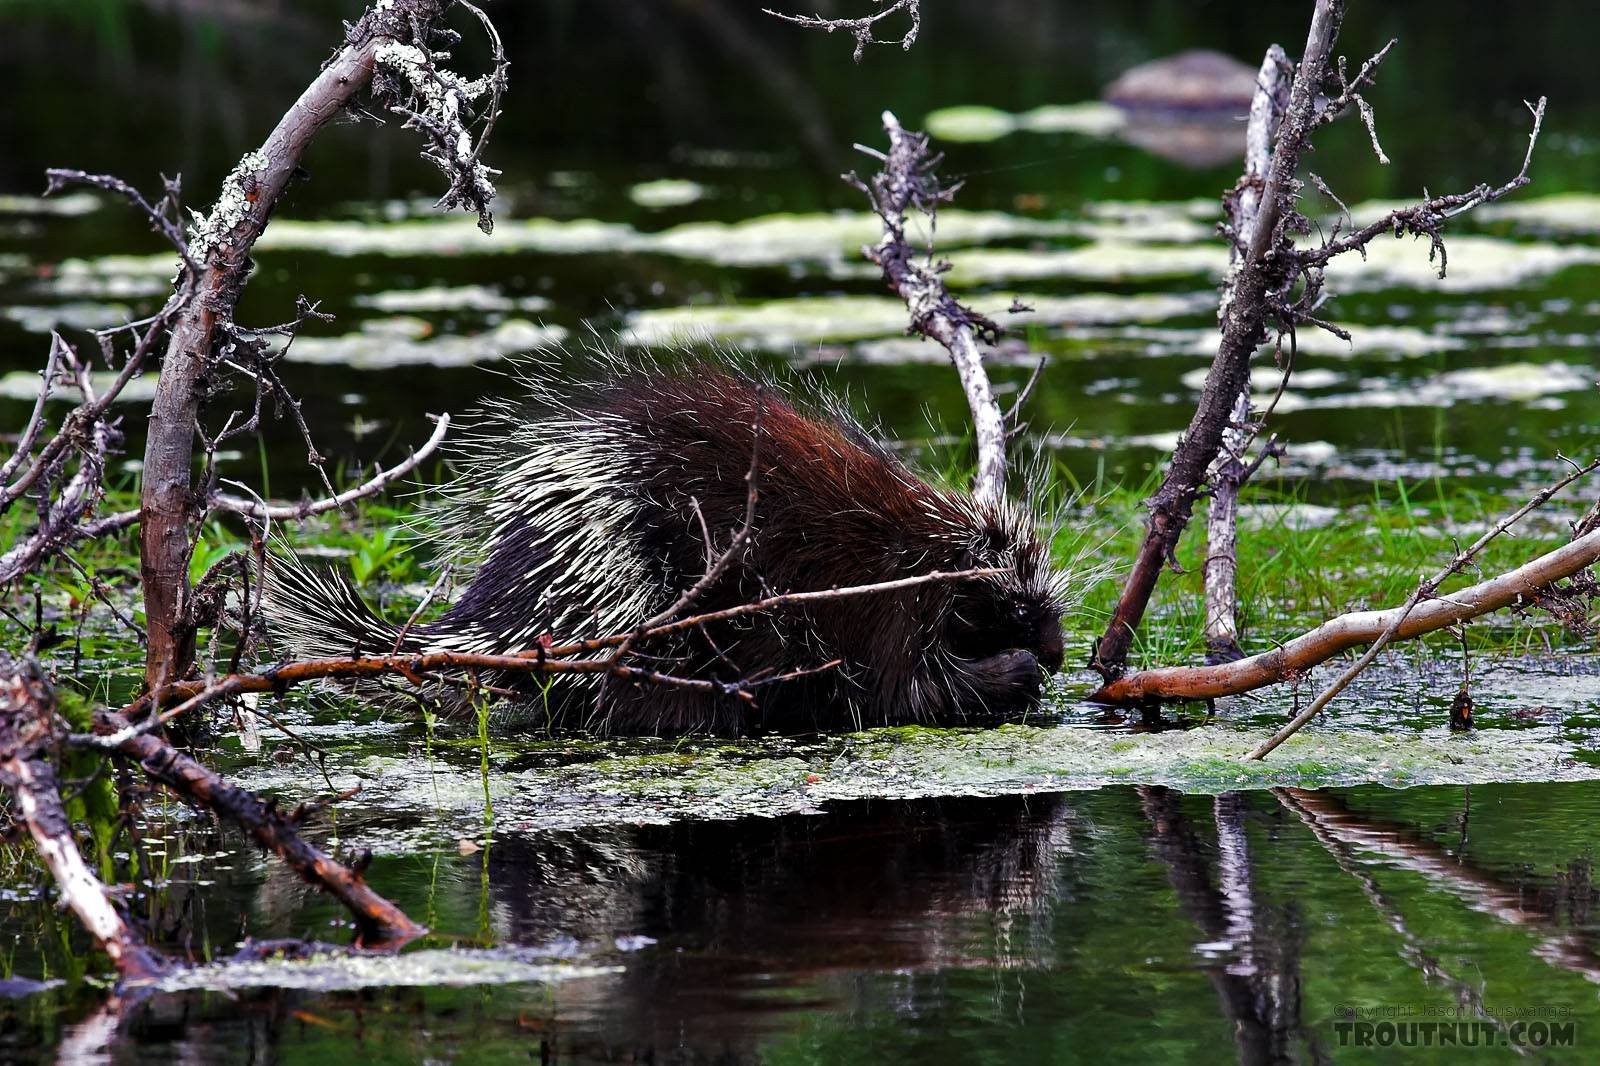 This porcupine seemed to be feeding on the filamentous green algae that had accumulated around the tip of a fallen cedar sweeper on a classic piece of northwoods trout water. From the Bois Brule River in Wisconsin.